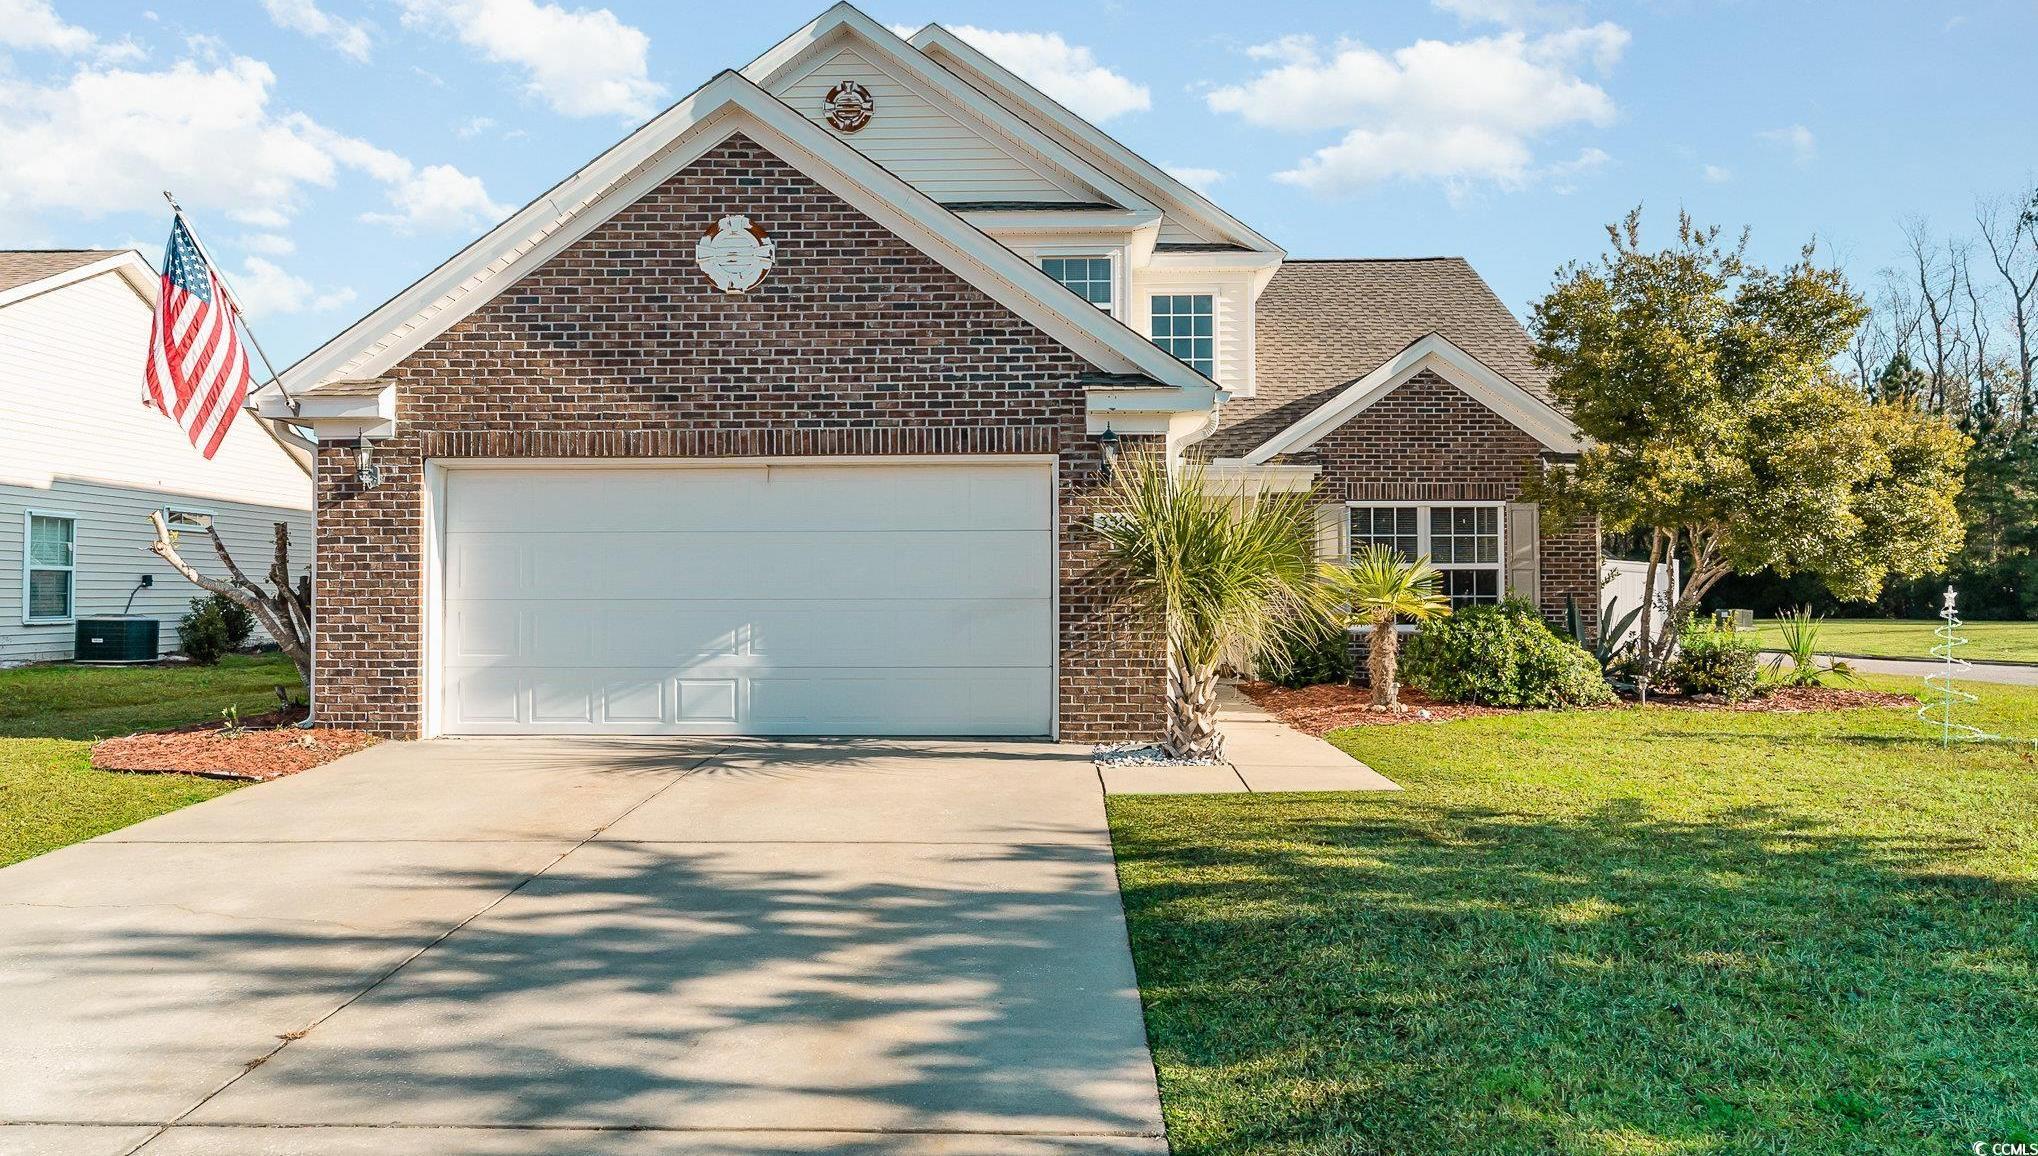 Photo one of 350 River Run Dr. Myrtle Beach SC 29588 | MLS 2324742